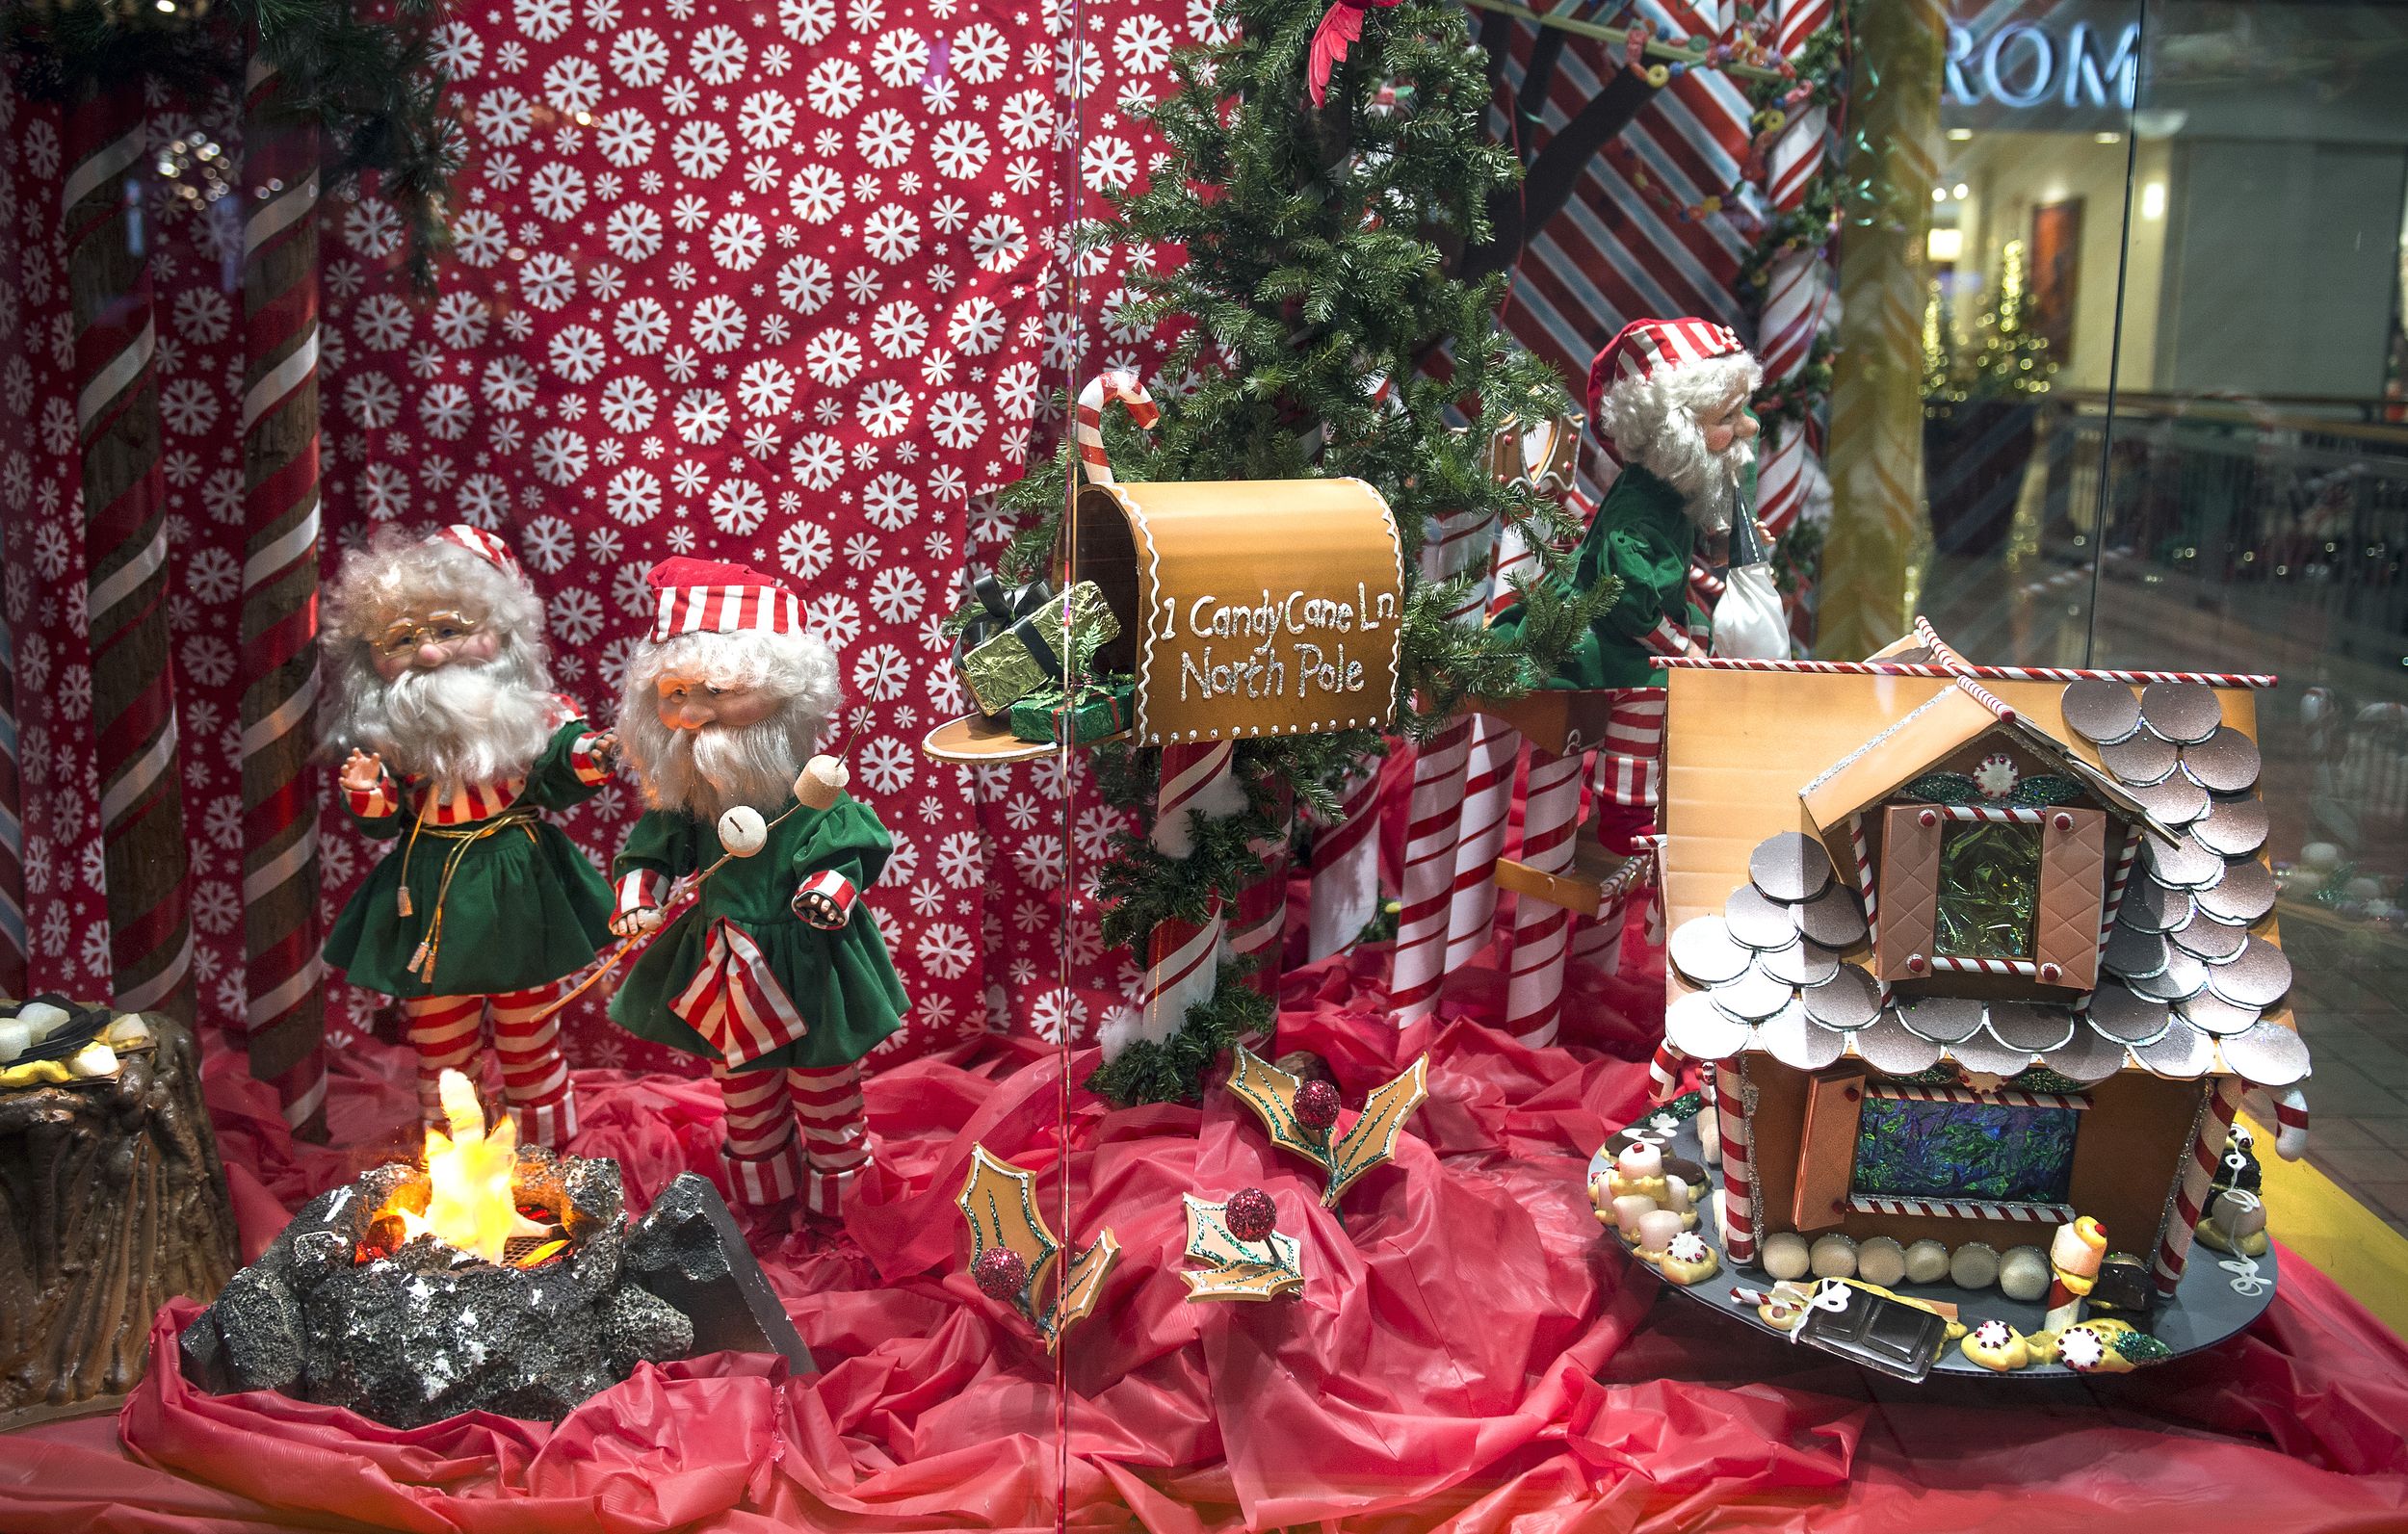 Be the envy of the street with a fantastic Christmas window display